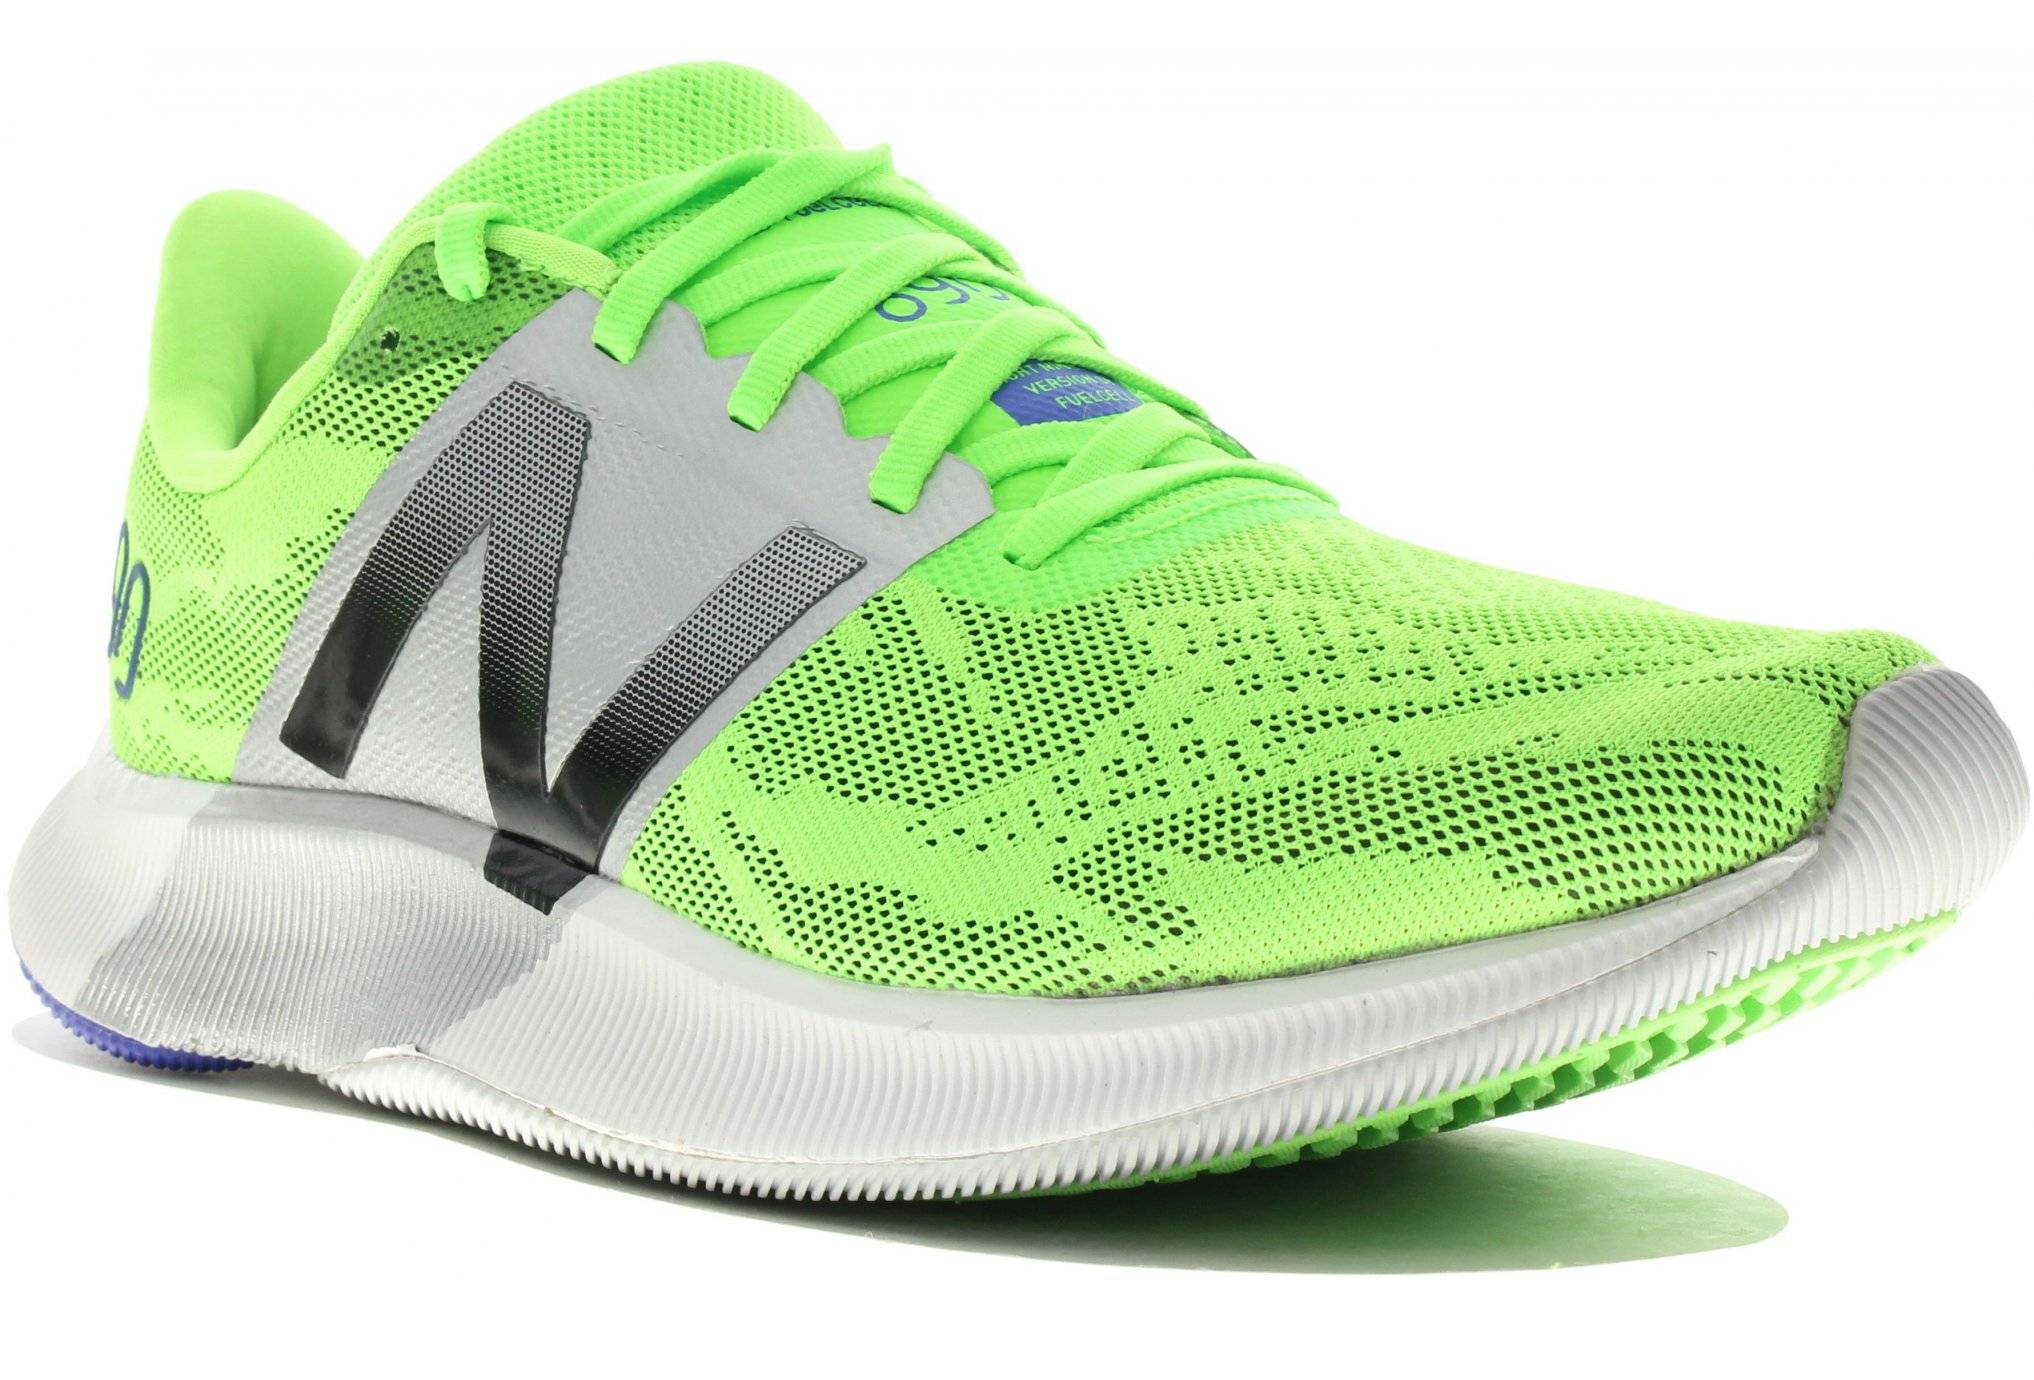 New Balance FuelCell M 890 V8 - D 